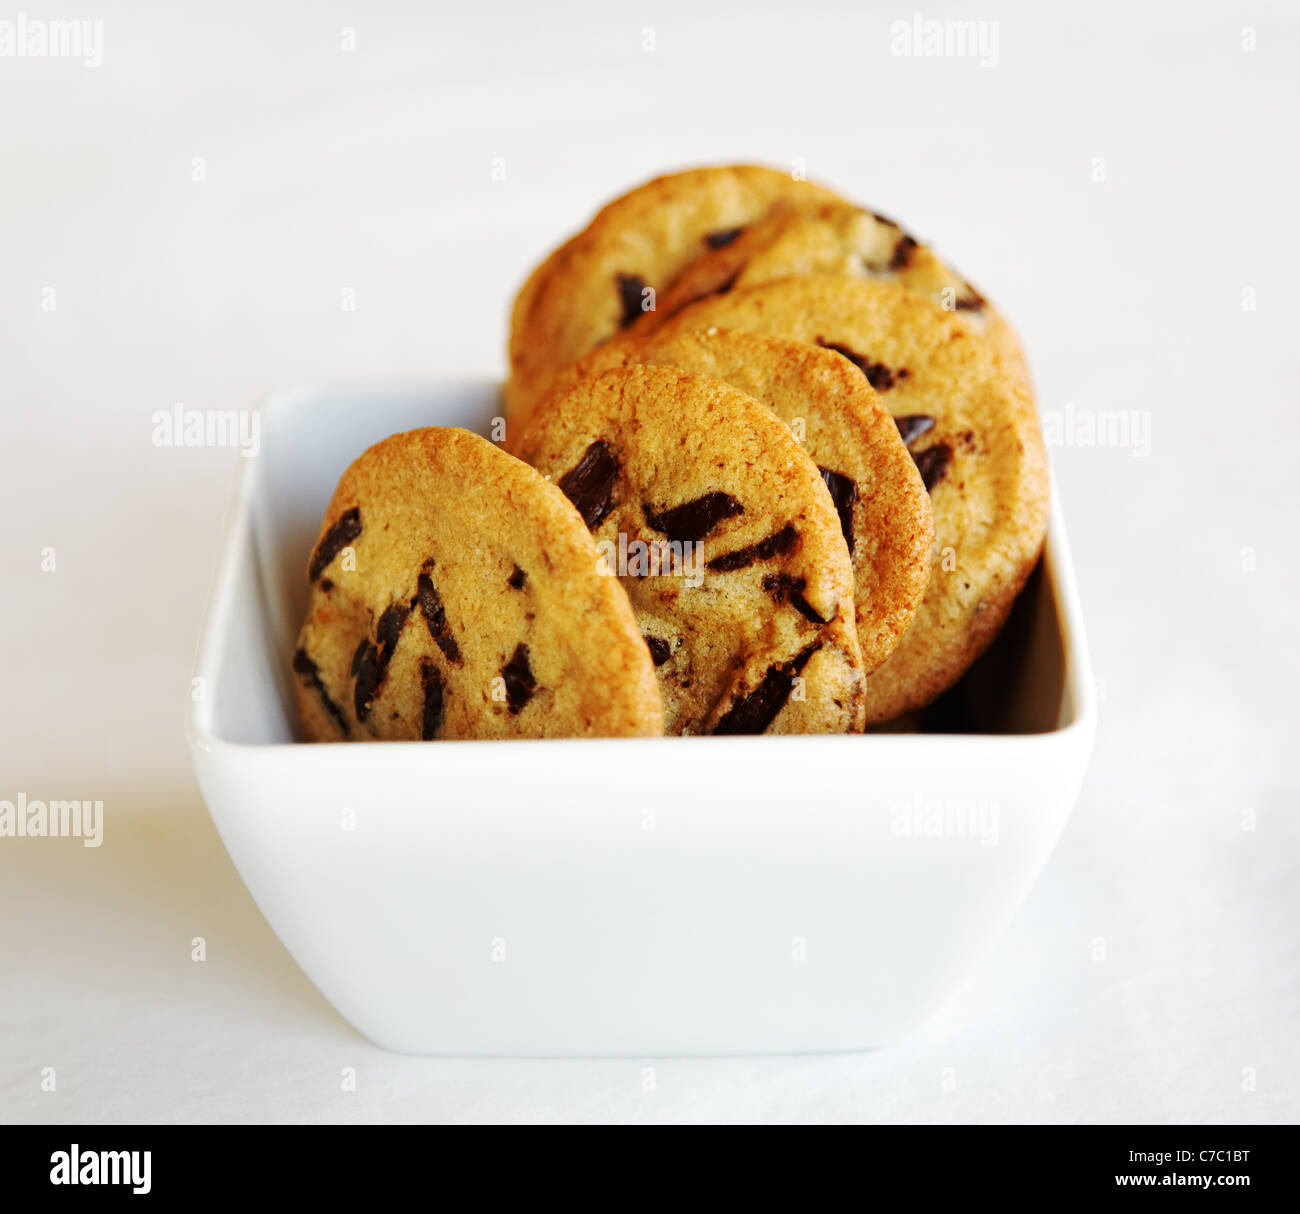 Chocolate chip cookies in white bowl, by pastry chef Laurie Pfalzer, Pastry Craft Stock Photo